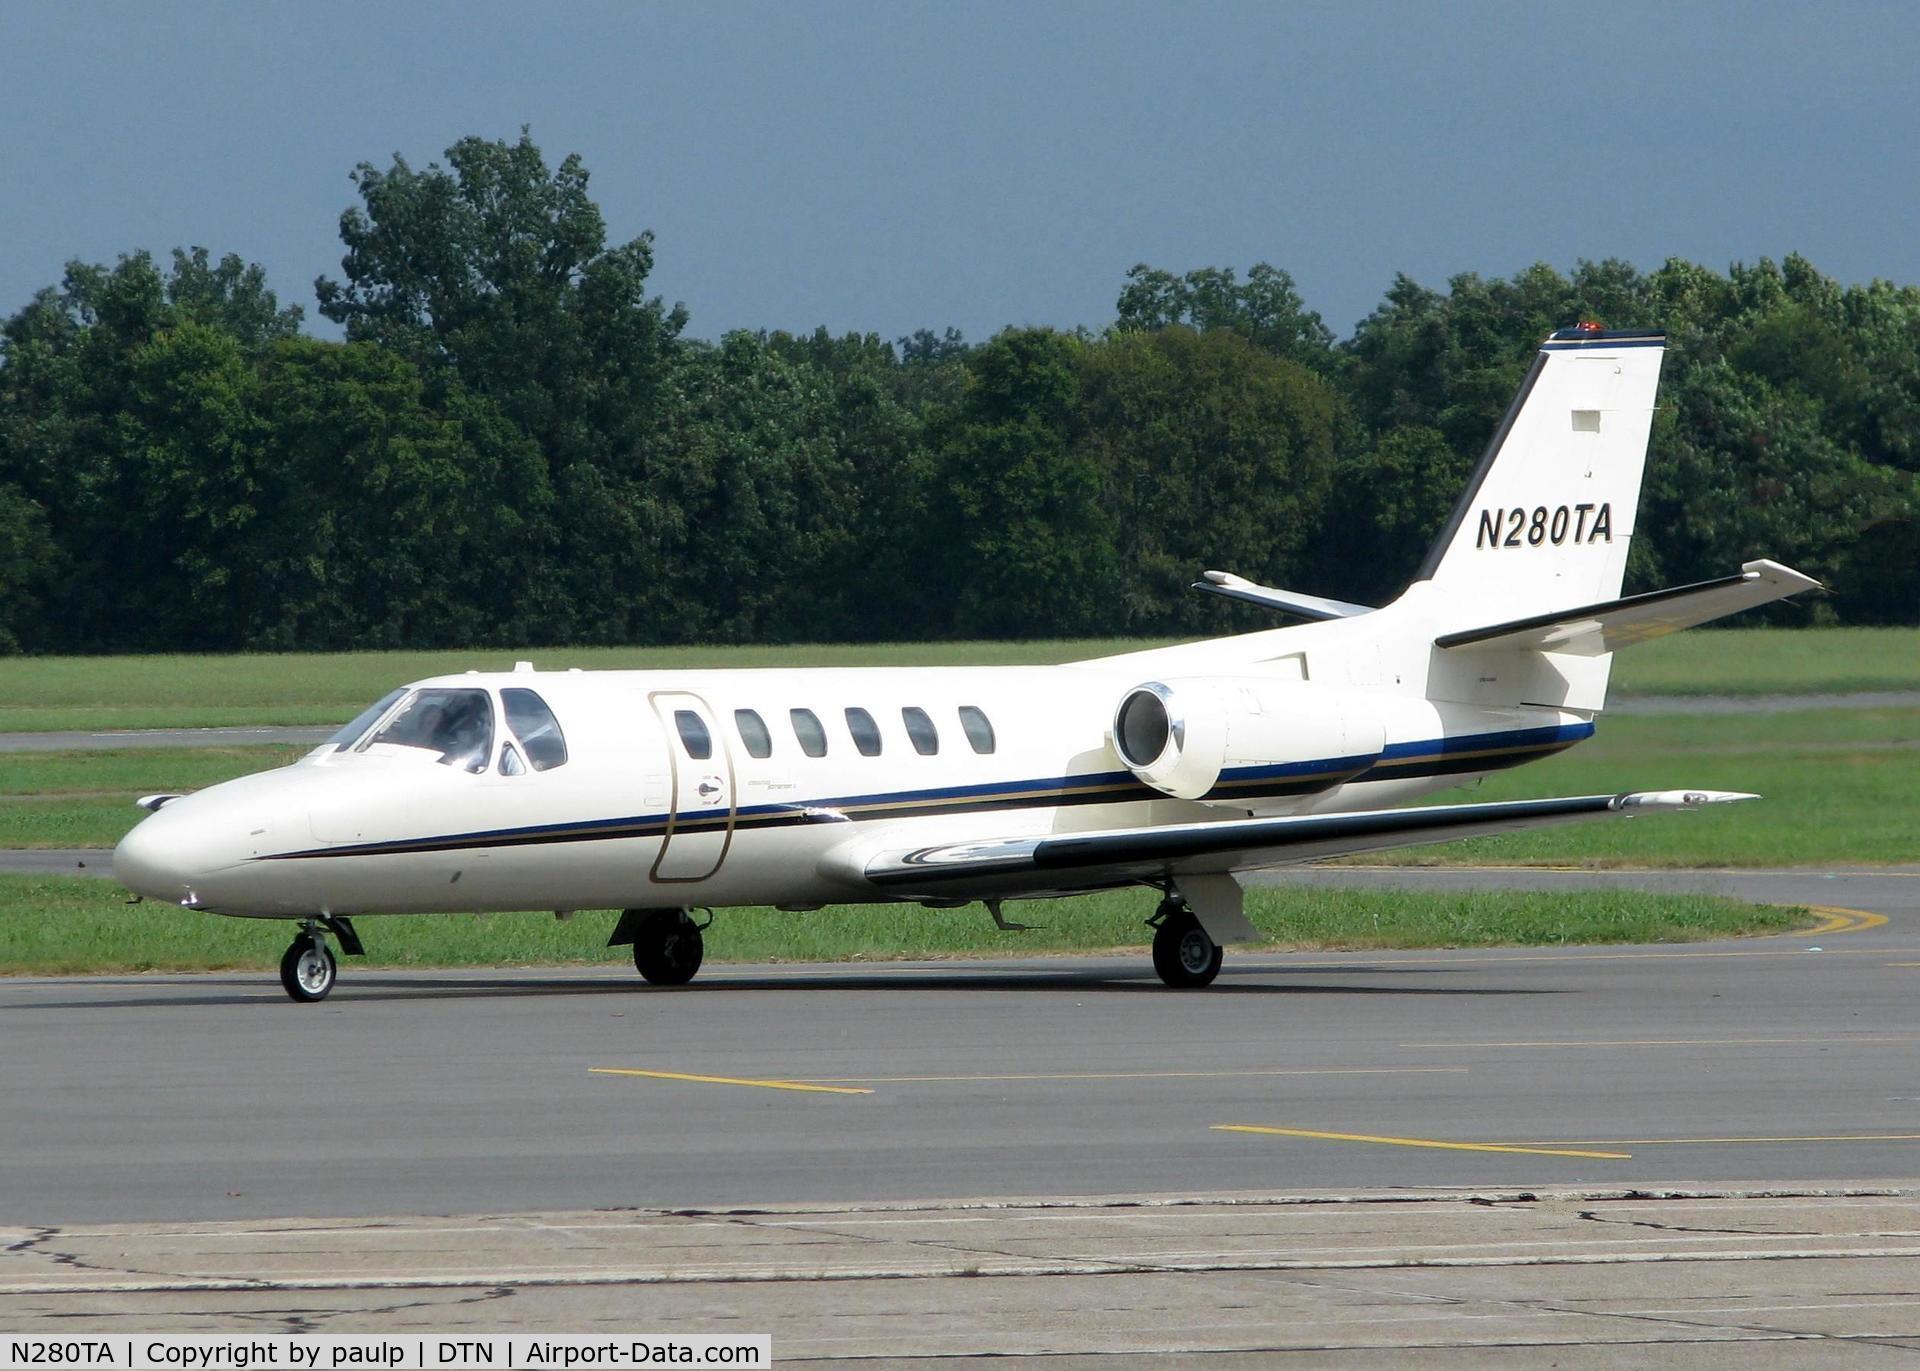 N280TA, 1980 Cessna 550 Citation II C/N 550-0206, Taxiing in after landing at Downtown Shreveport.